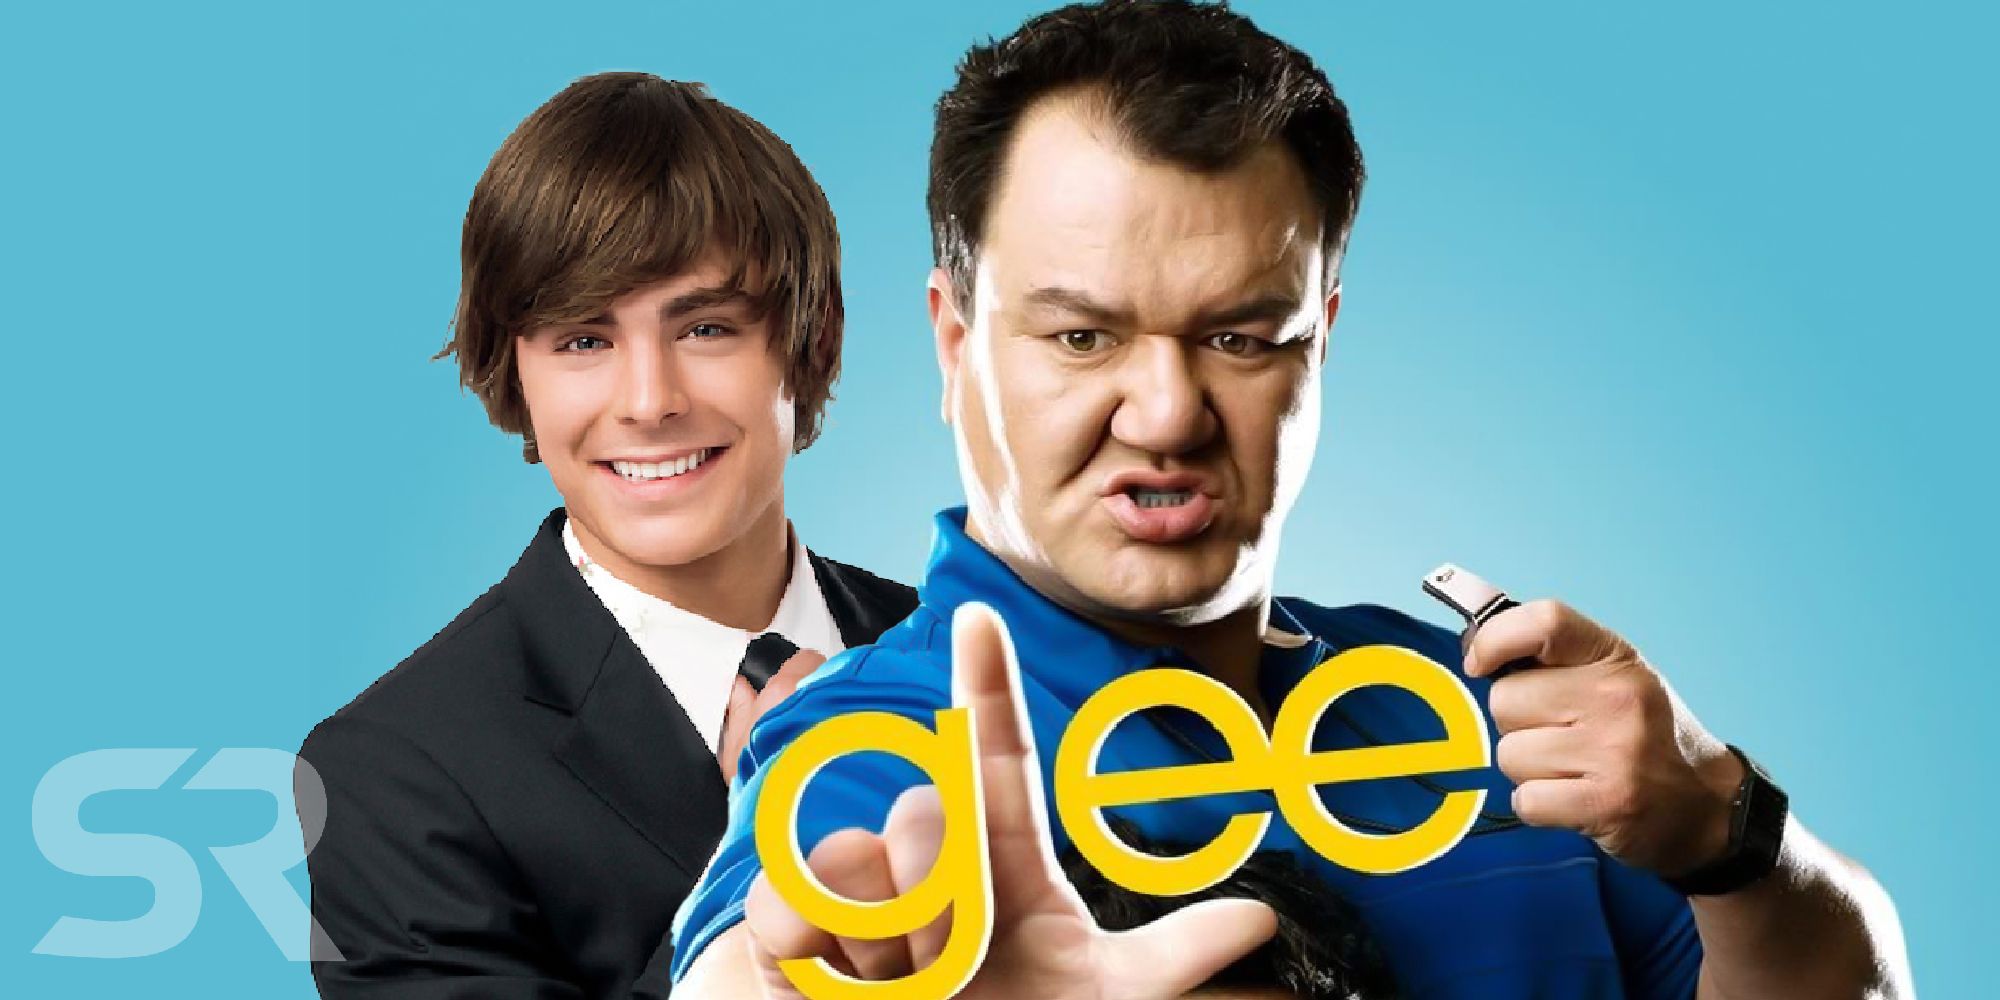 Glee vs High School Musical Which Was Better